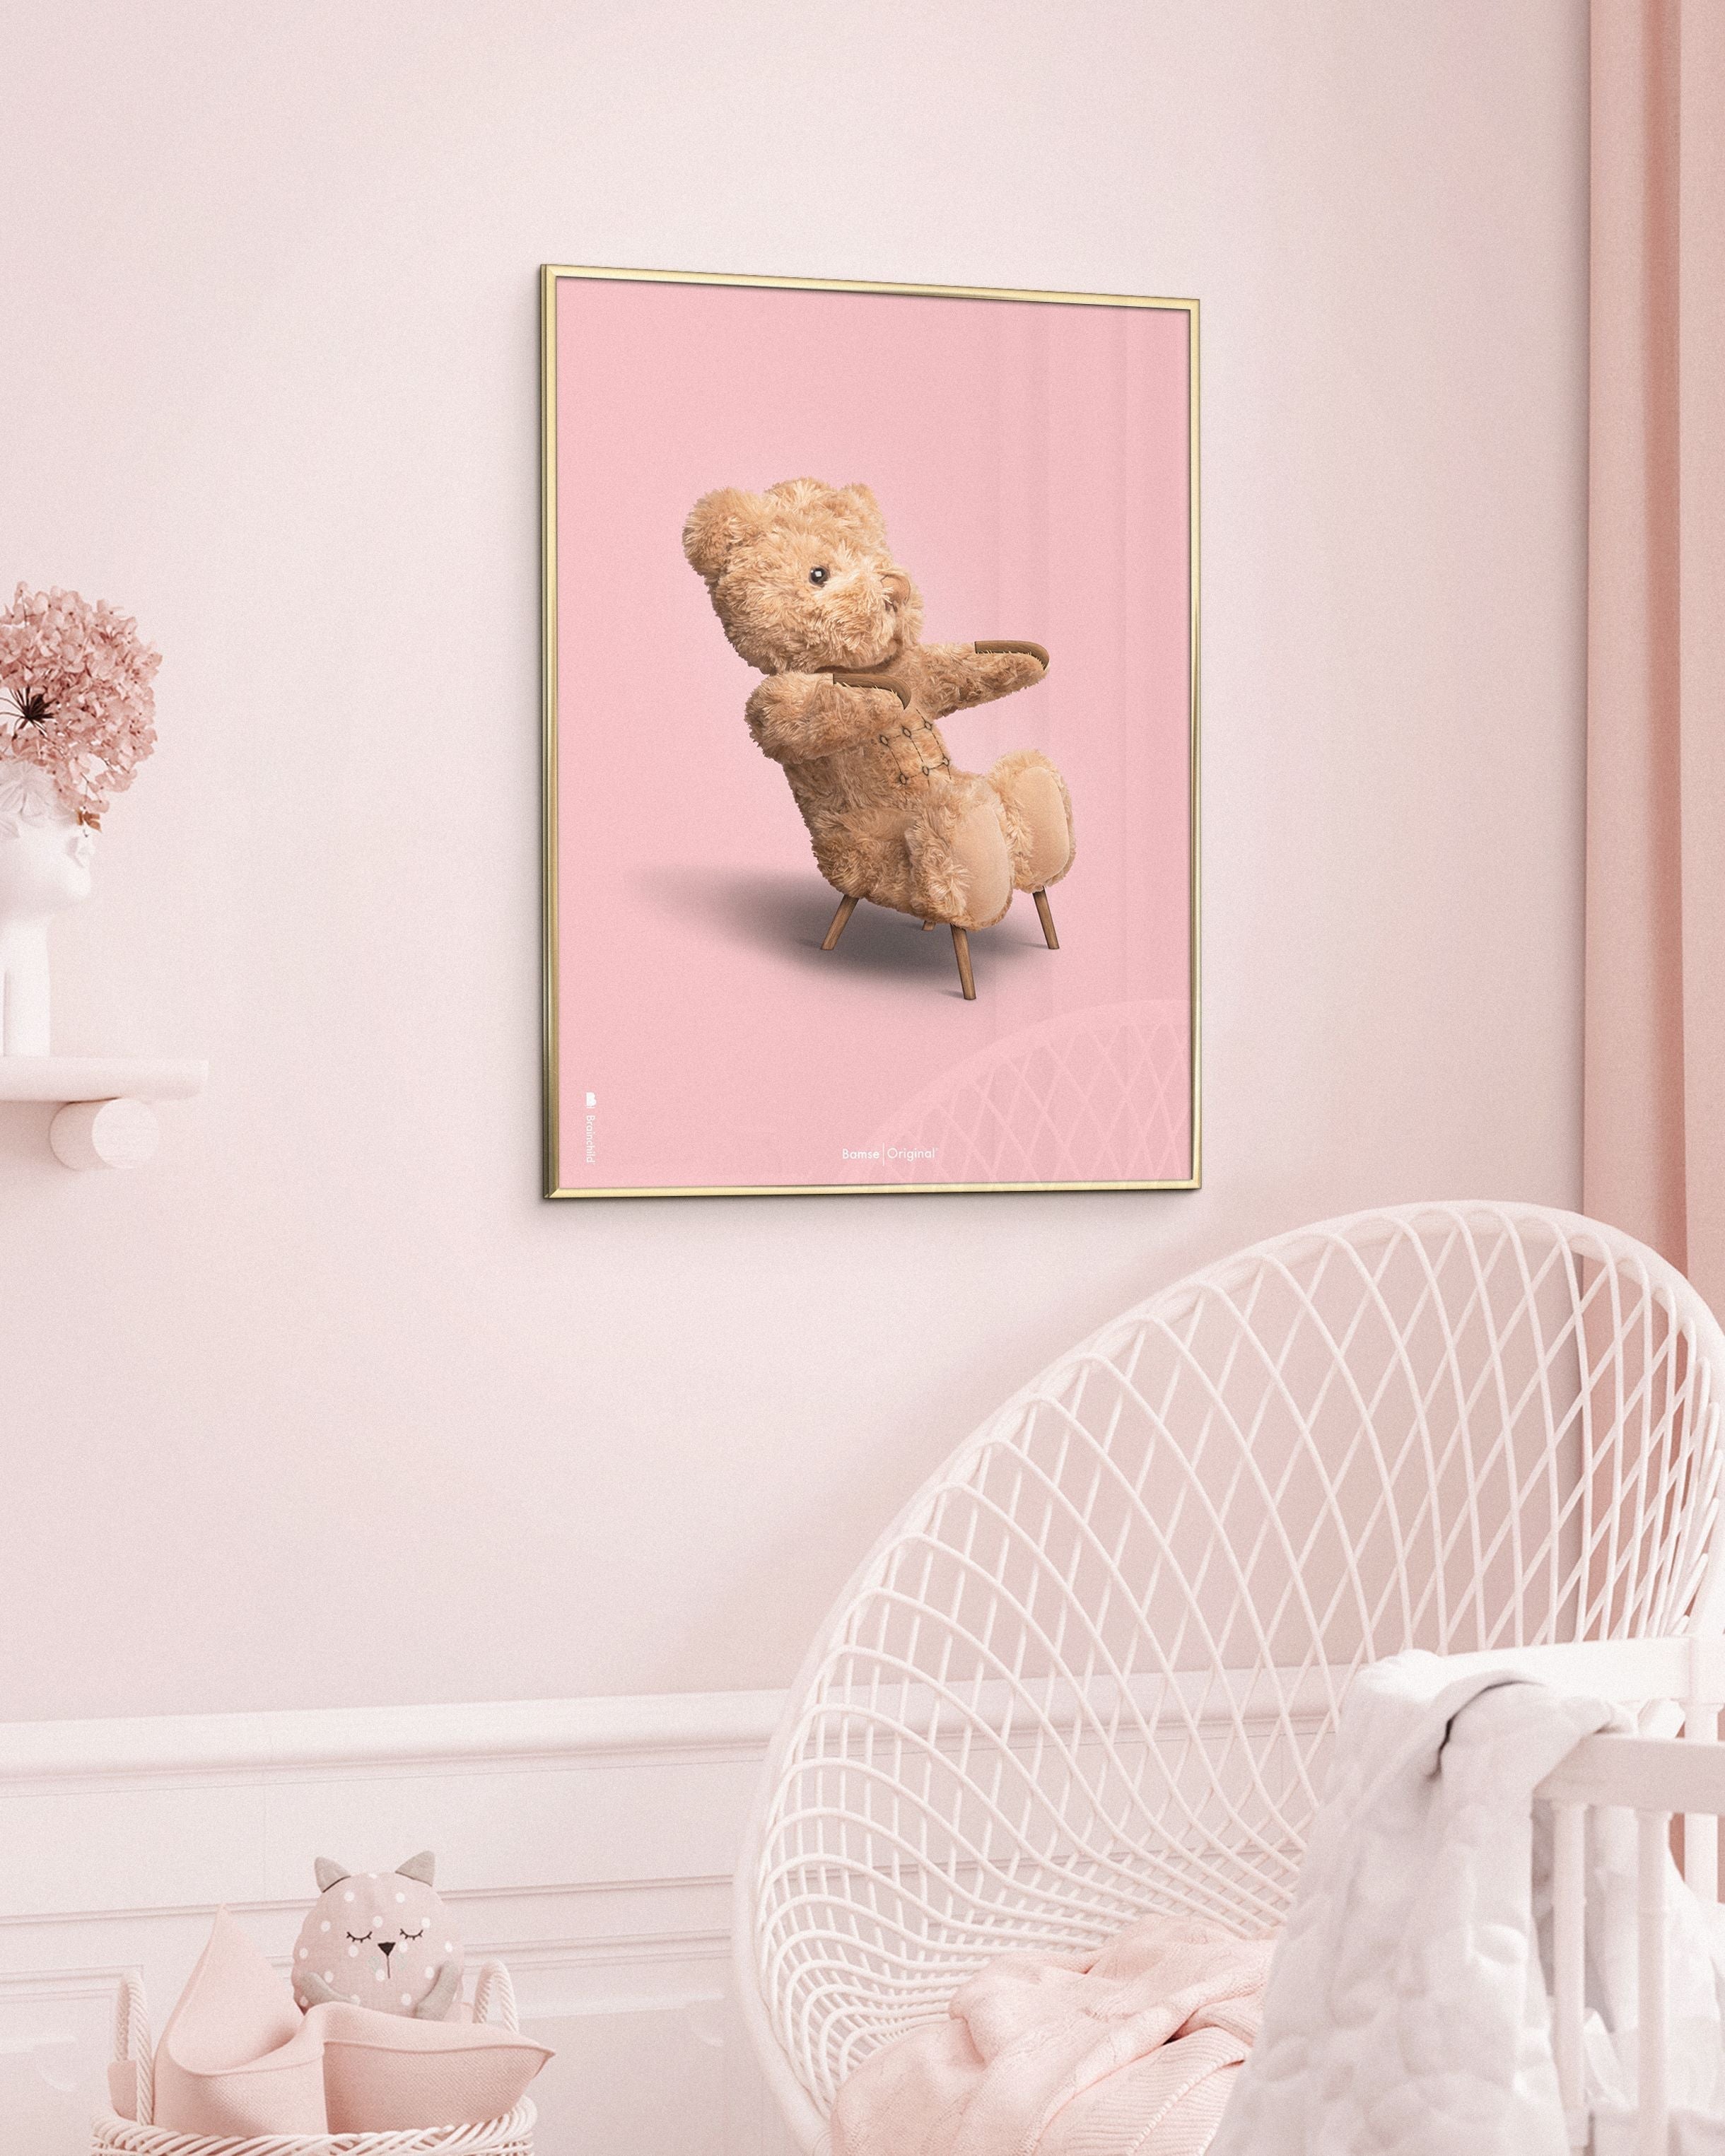 Brainchild Teddy Bear Classic Poster Frame Made Of Black Lacquered Wood 70x100 Cm, Pink Background